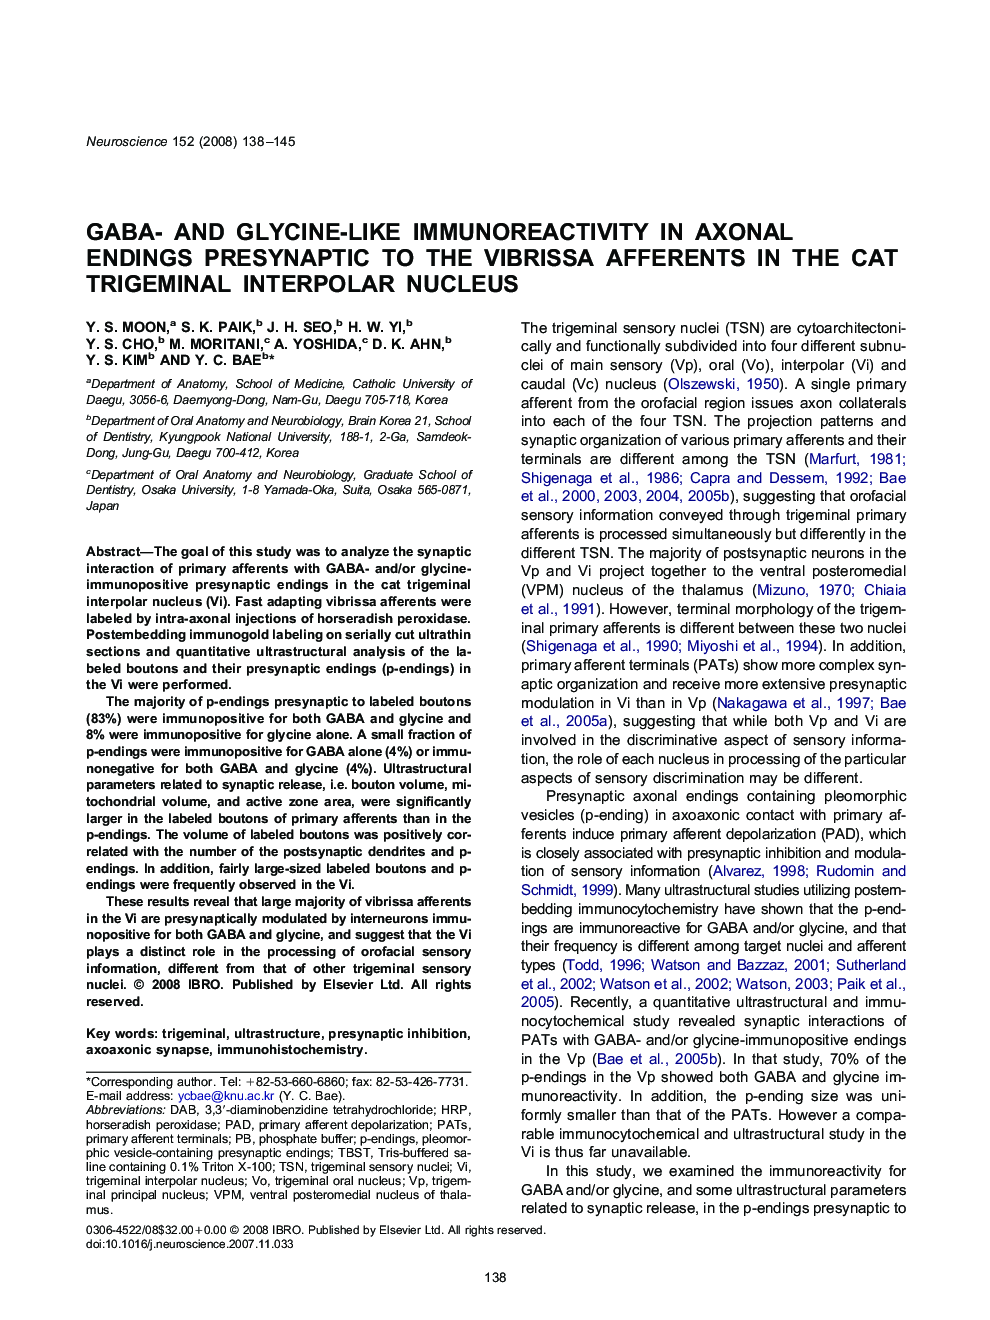 GABA- and glycine-like immunoreactivity in axonal endings presynaptic to the vibrissa afferents in the cat trigeminal interpolar nucleus